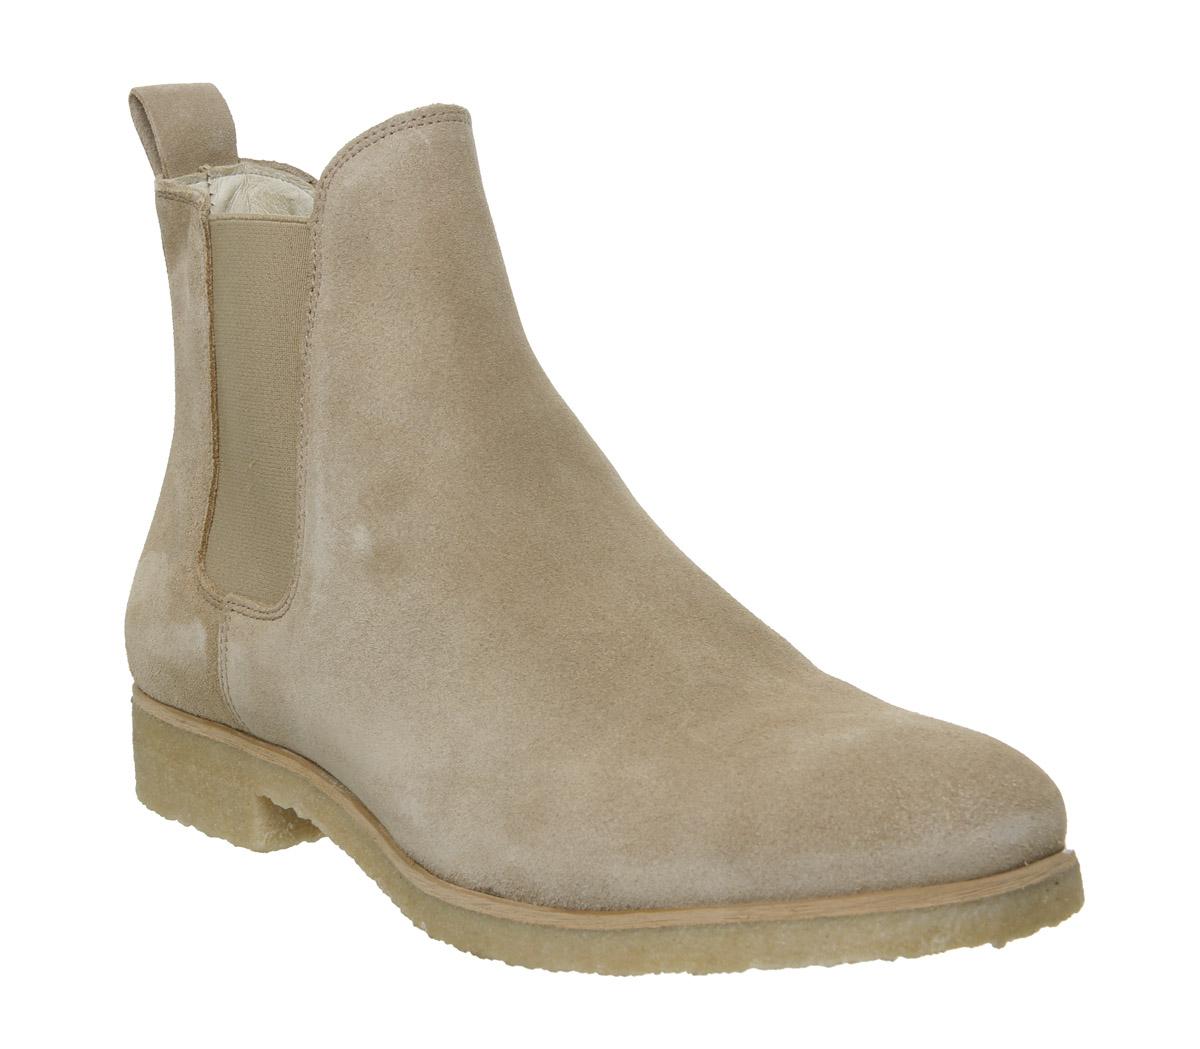 sand colored chelsea boots